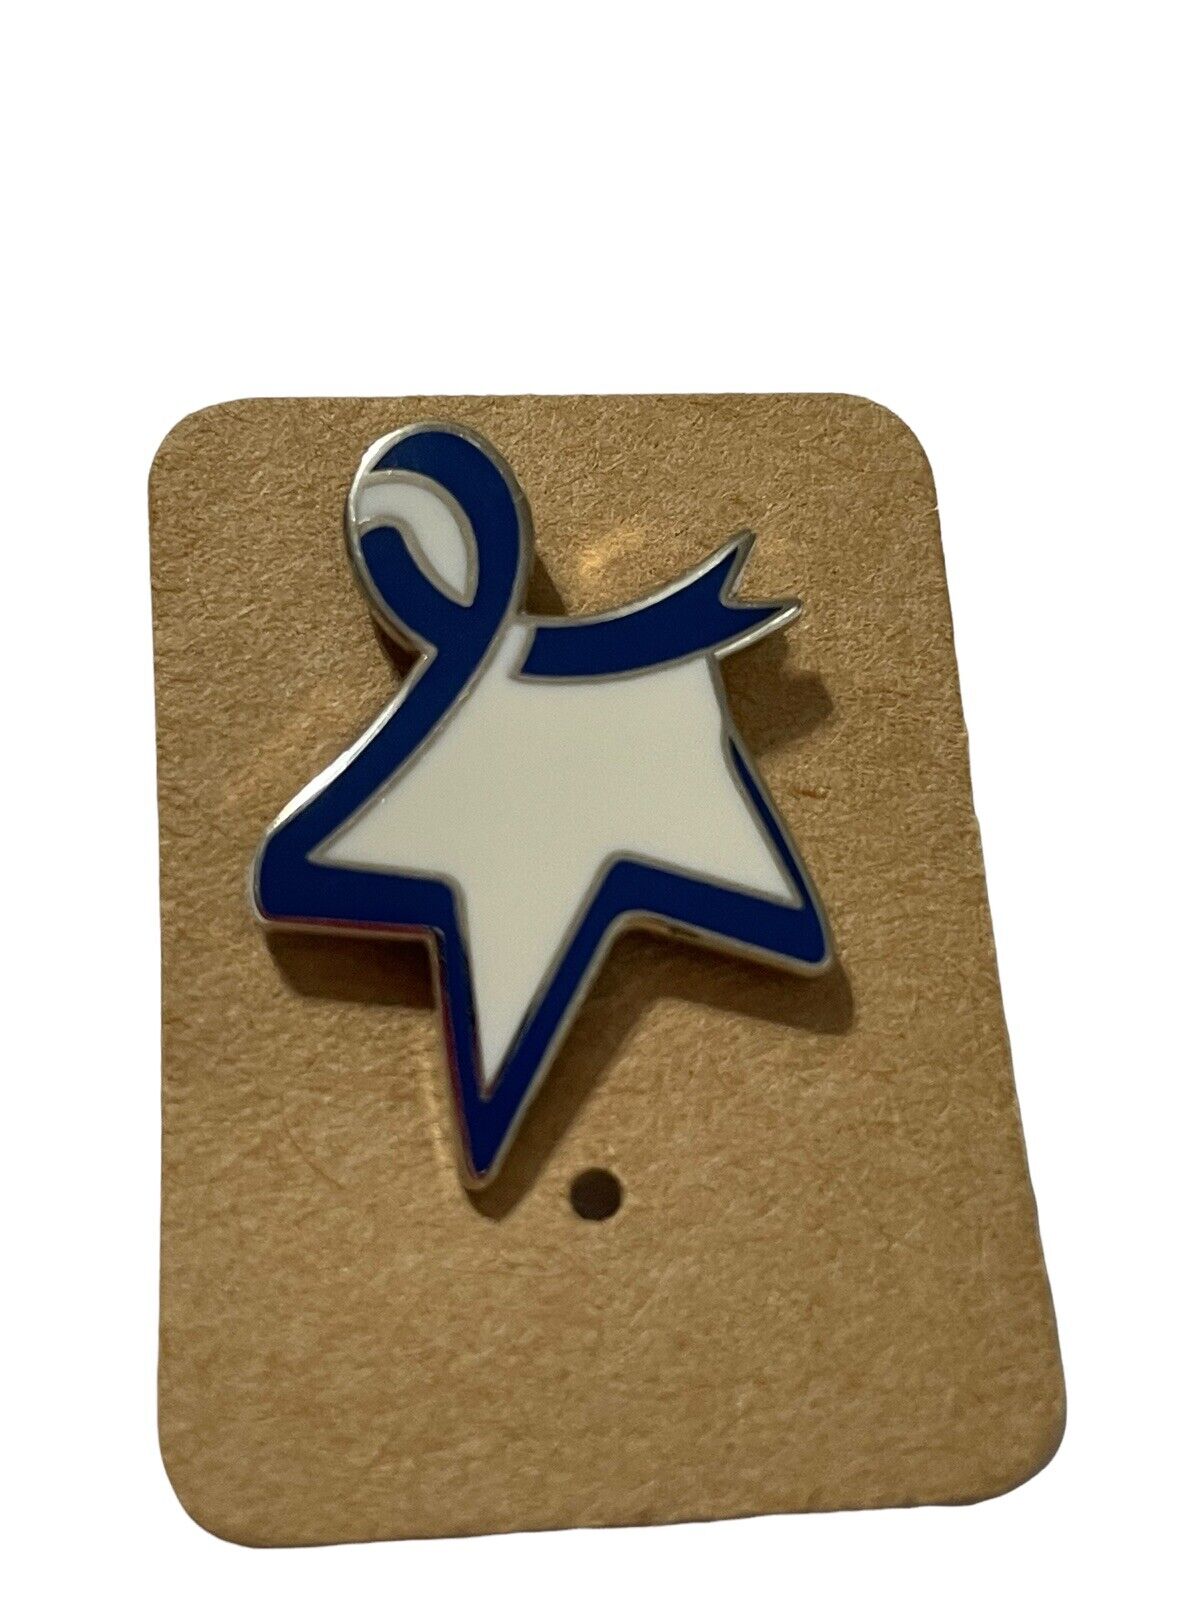 Dress In Blue Day Pin For a Future Free of Colon Cancer Awareness Fundraiser 